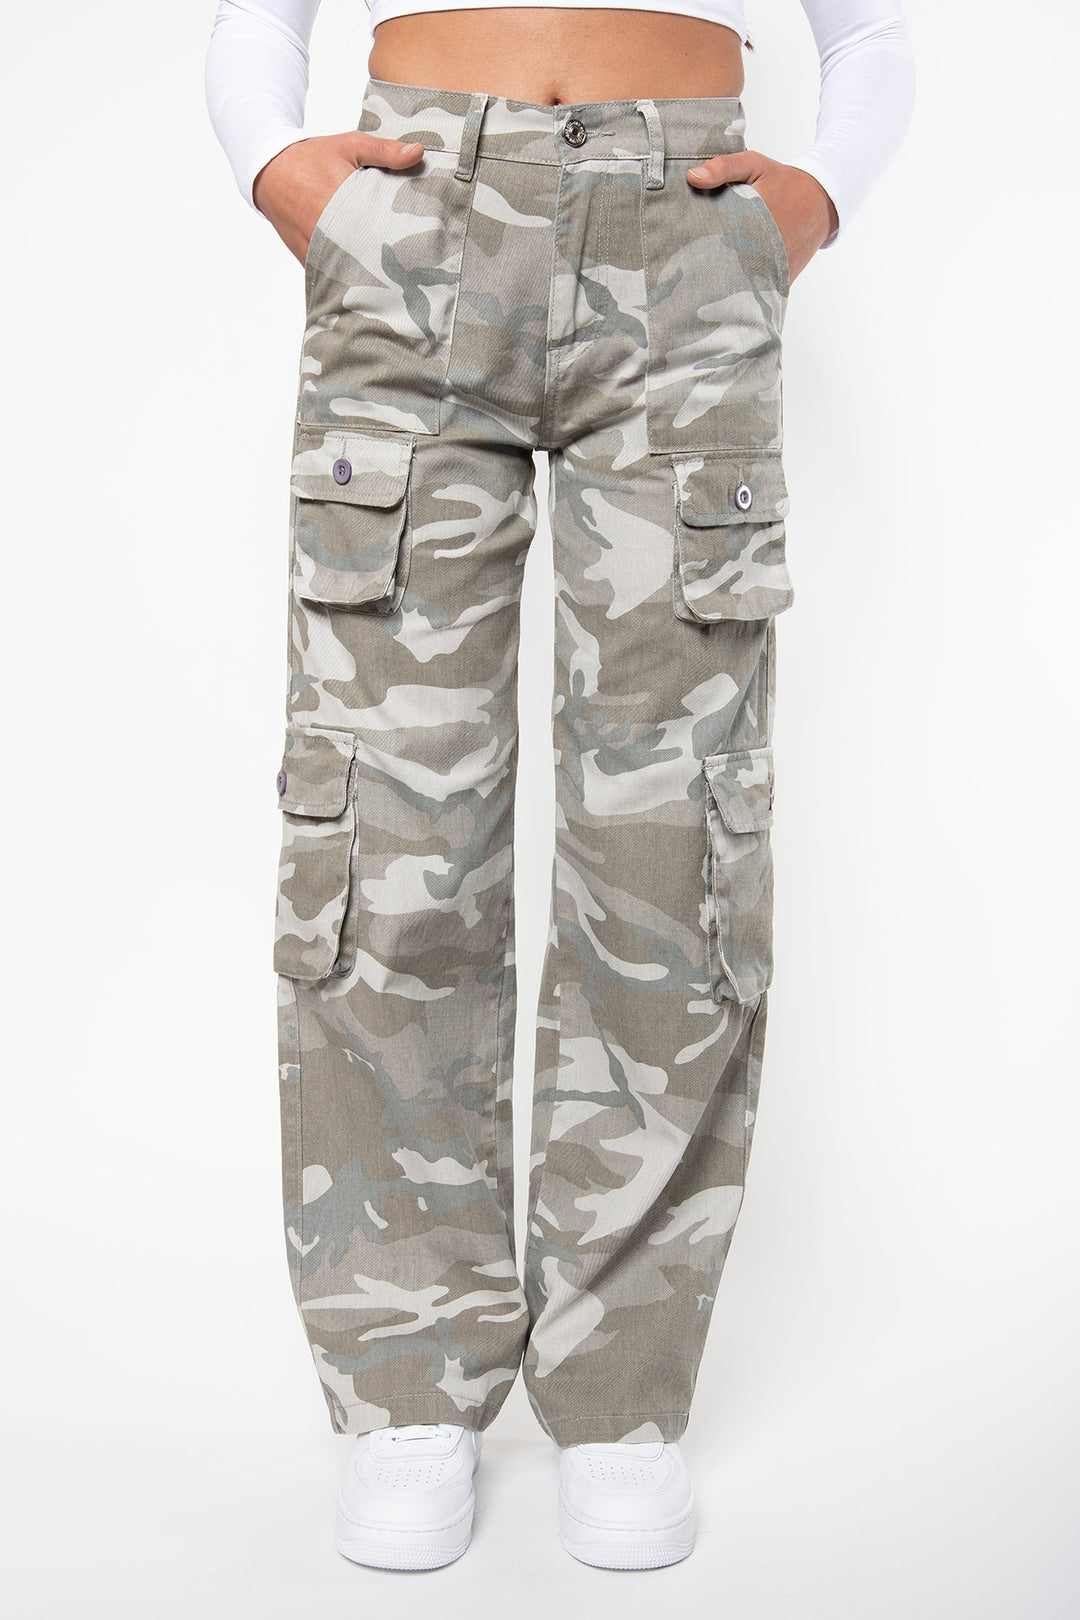 Loey Camouflage Cargo Pants Pants Routines Fashion   